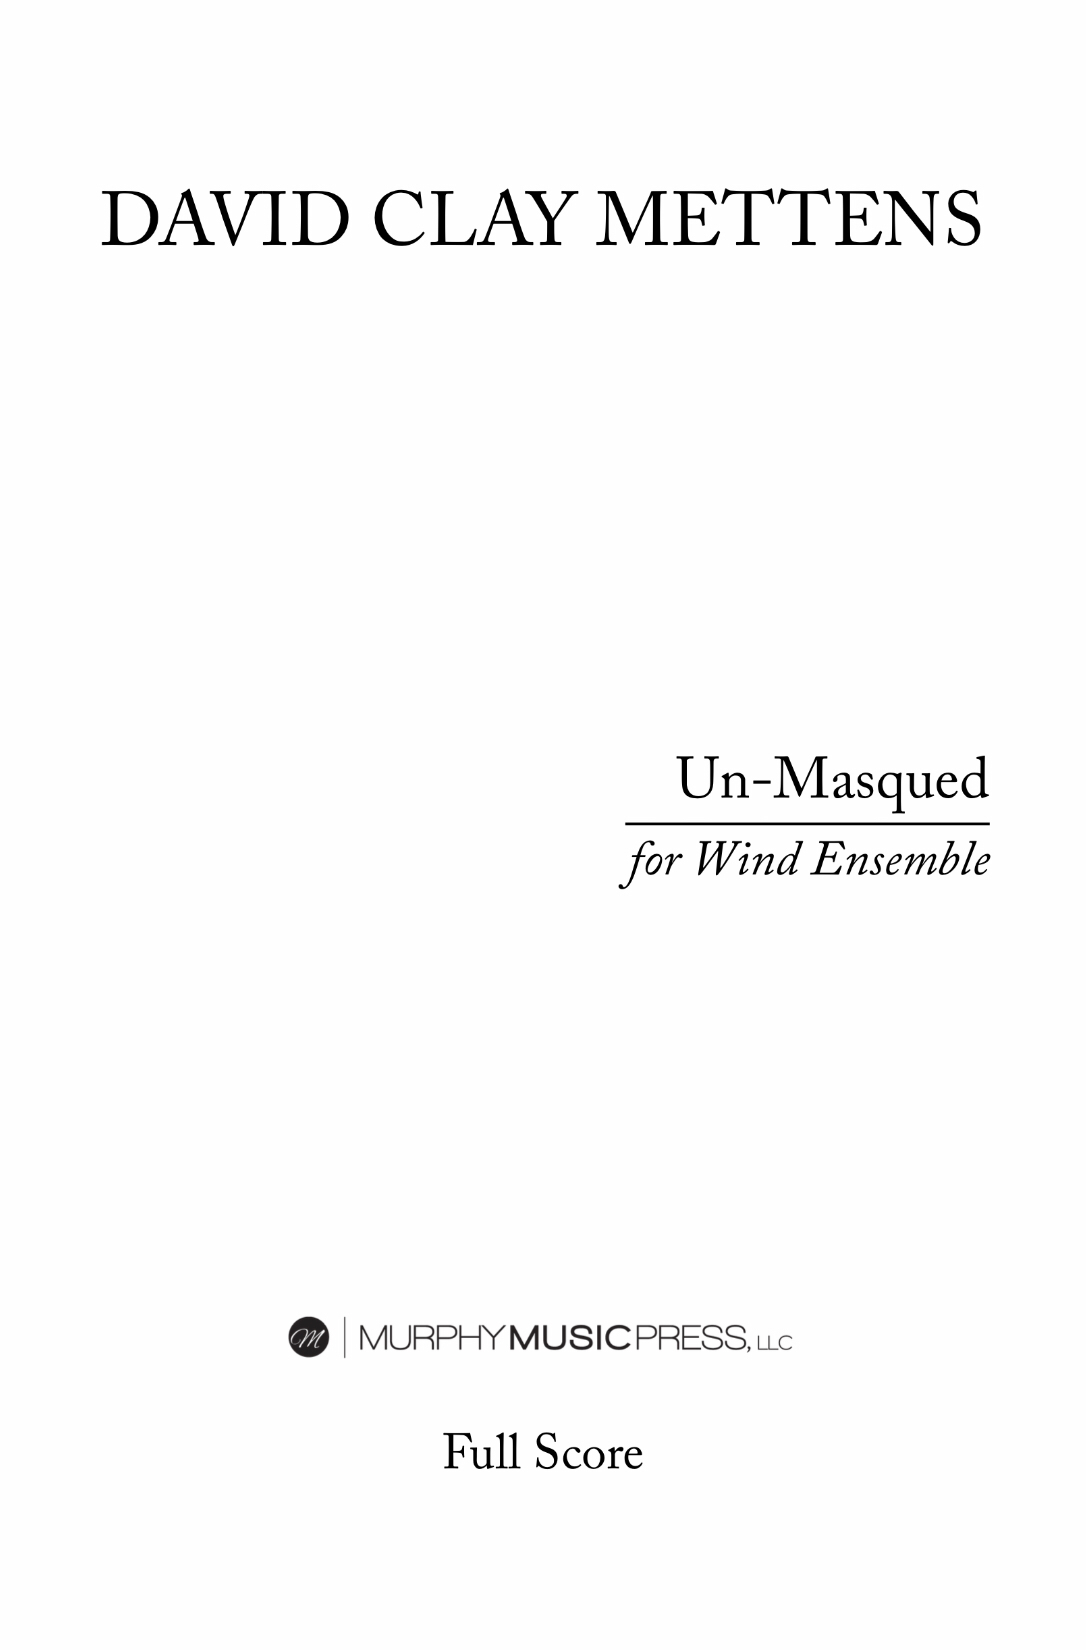 Un-Masqued (Score Only) by David Clay Mettens